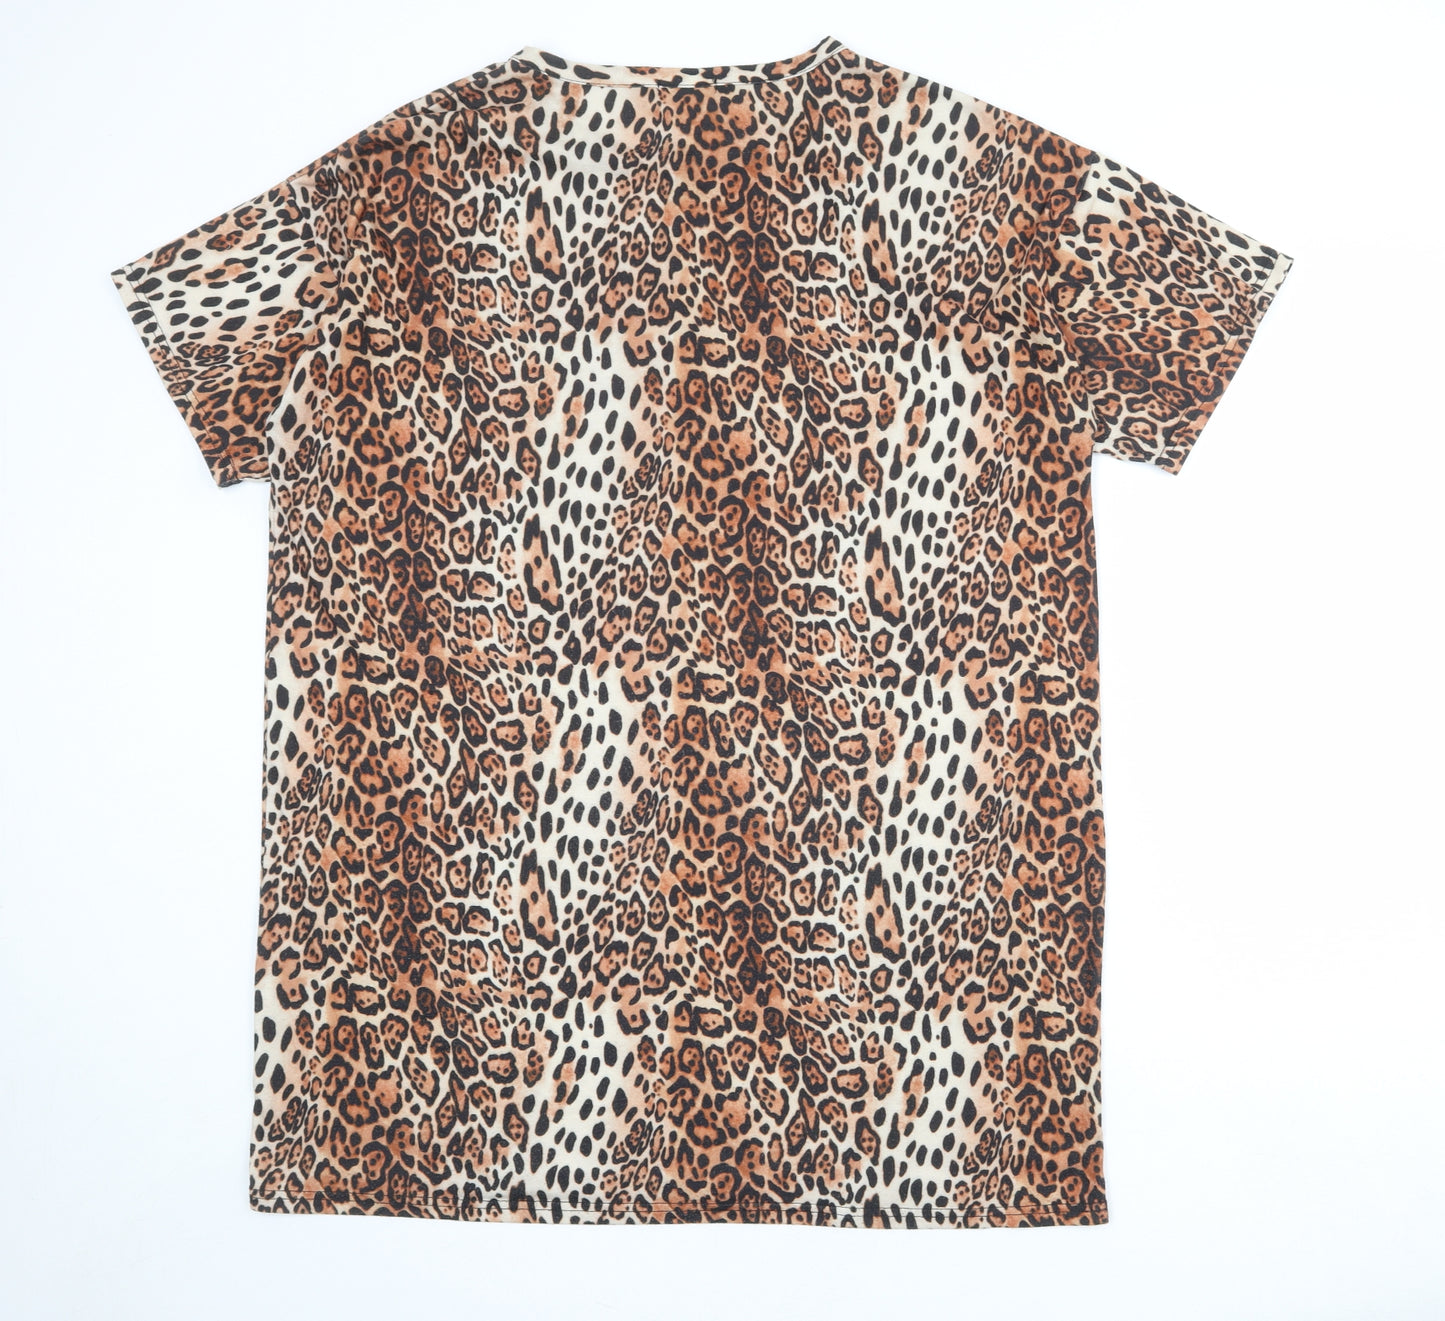 Boohoo Womens Multicoloured Animal Print Polyester T-Shirt Dress Size 18 Round Neck Pullover - Leopard pattern